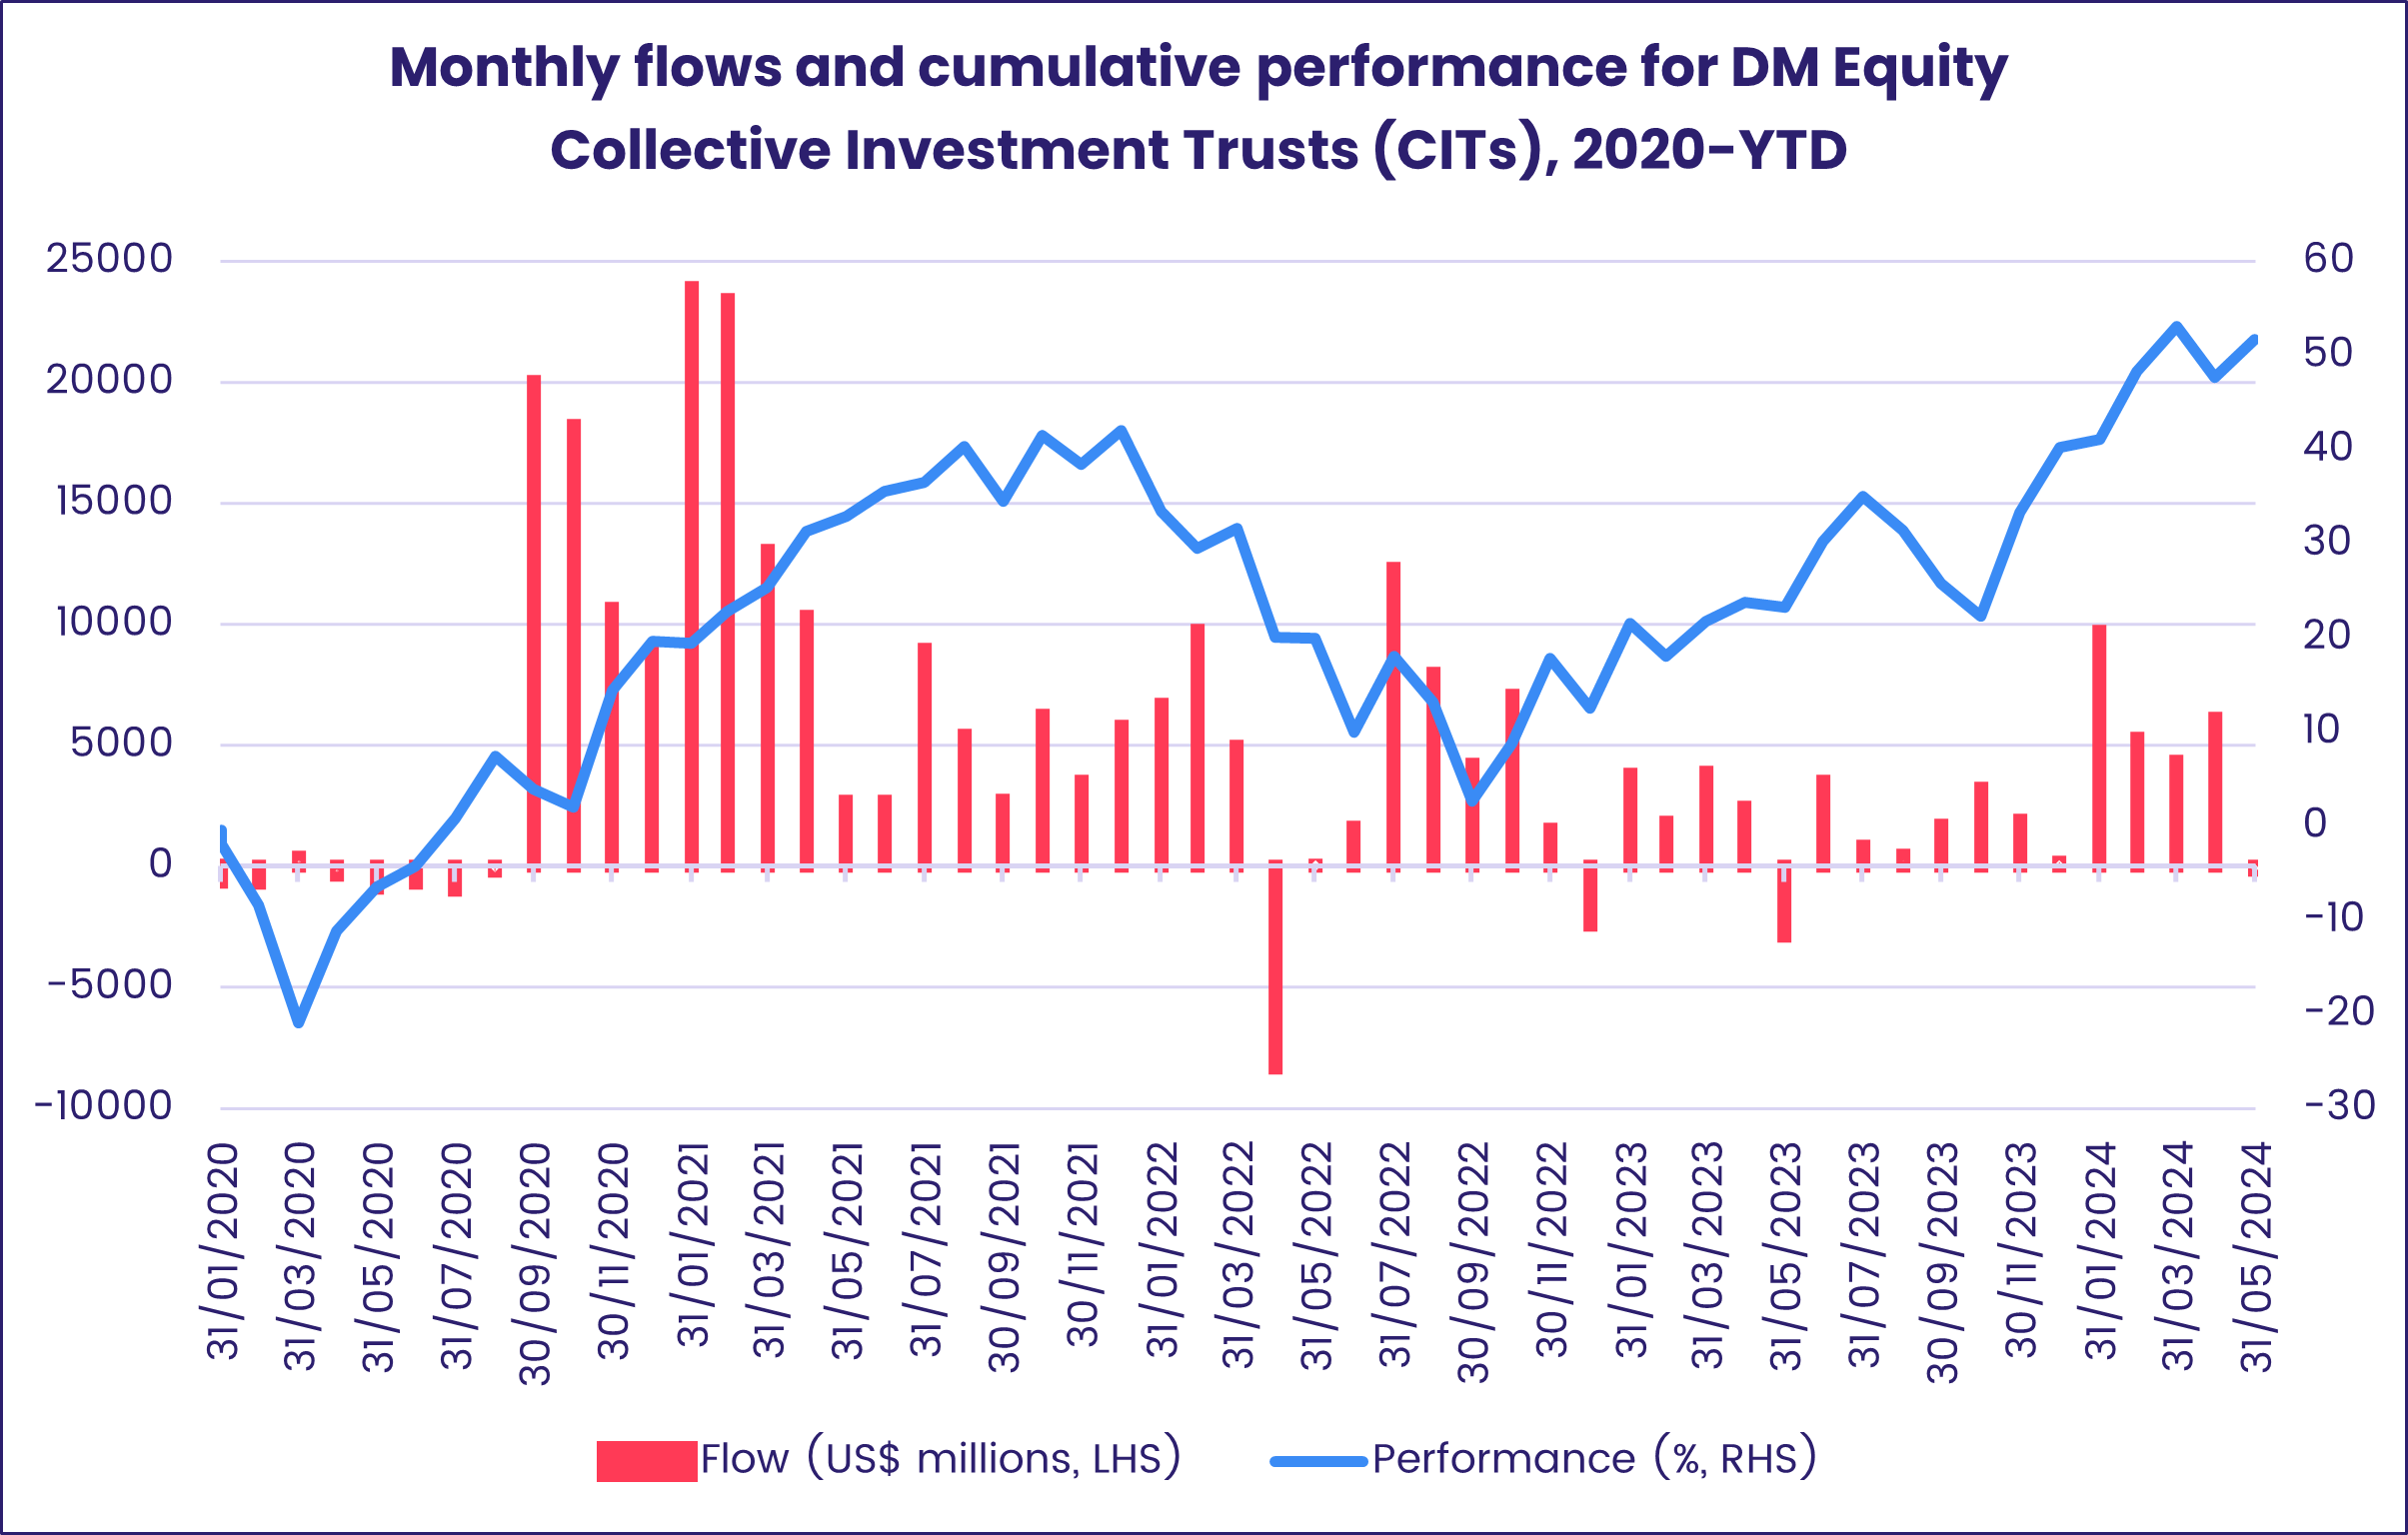 Chart representing 'Monthly flows and cumulative performance for DM Equity Collective Investment Trusts (CITs), 2020-YTD'